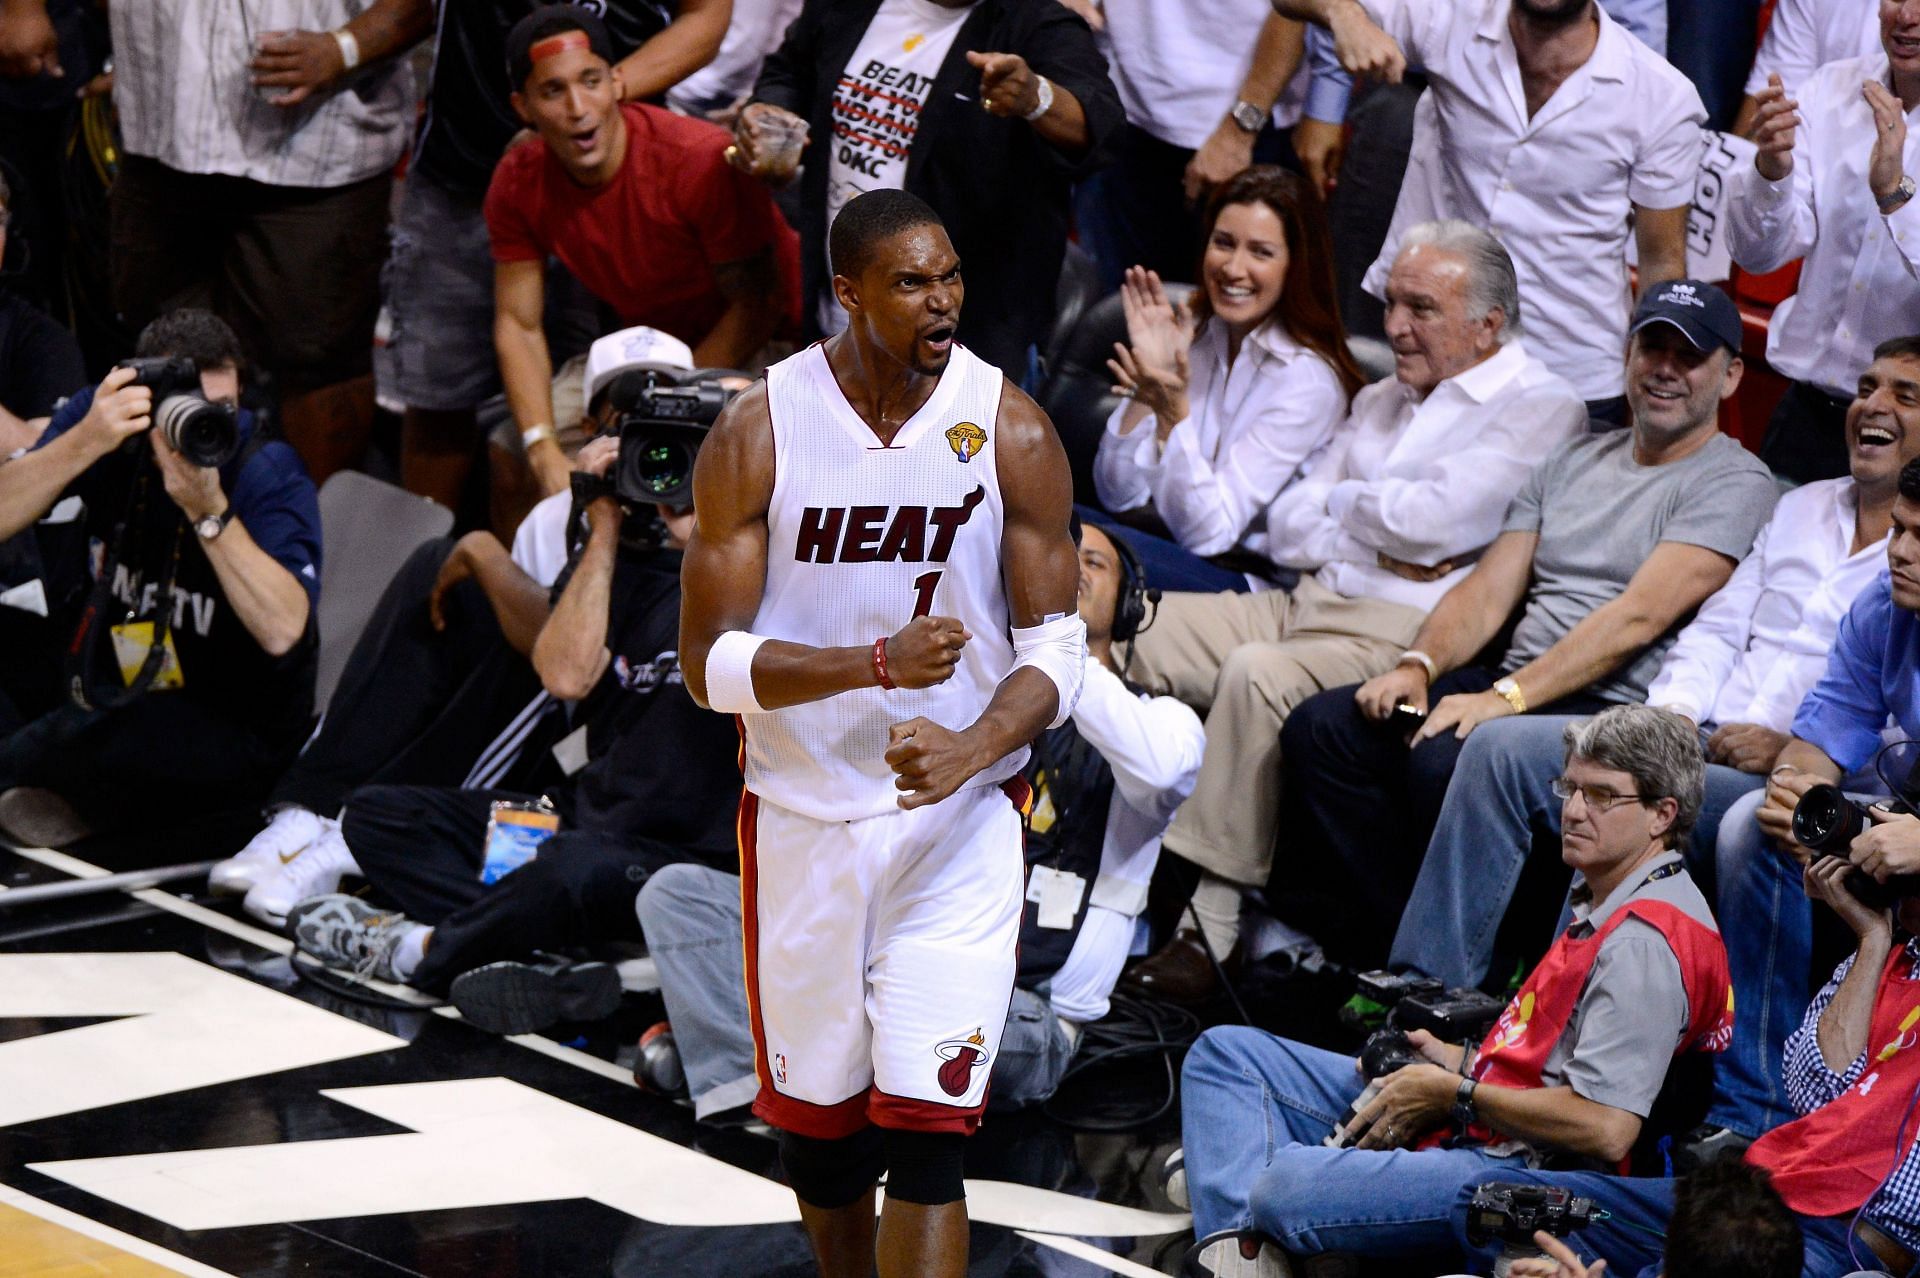 Chris Bosh was one of the best NBA players during his prime.